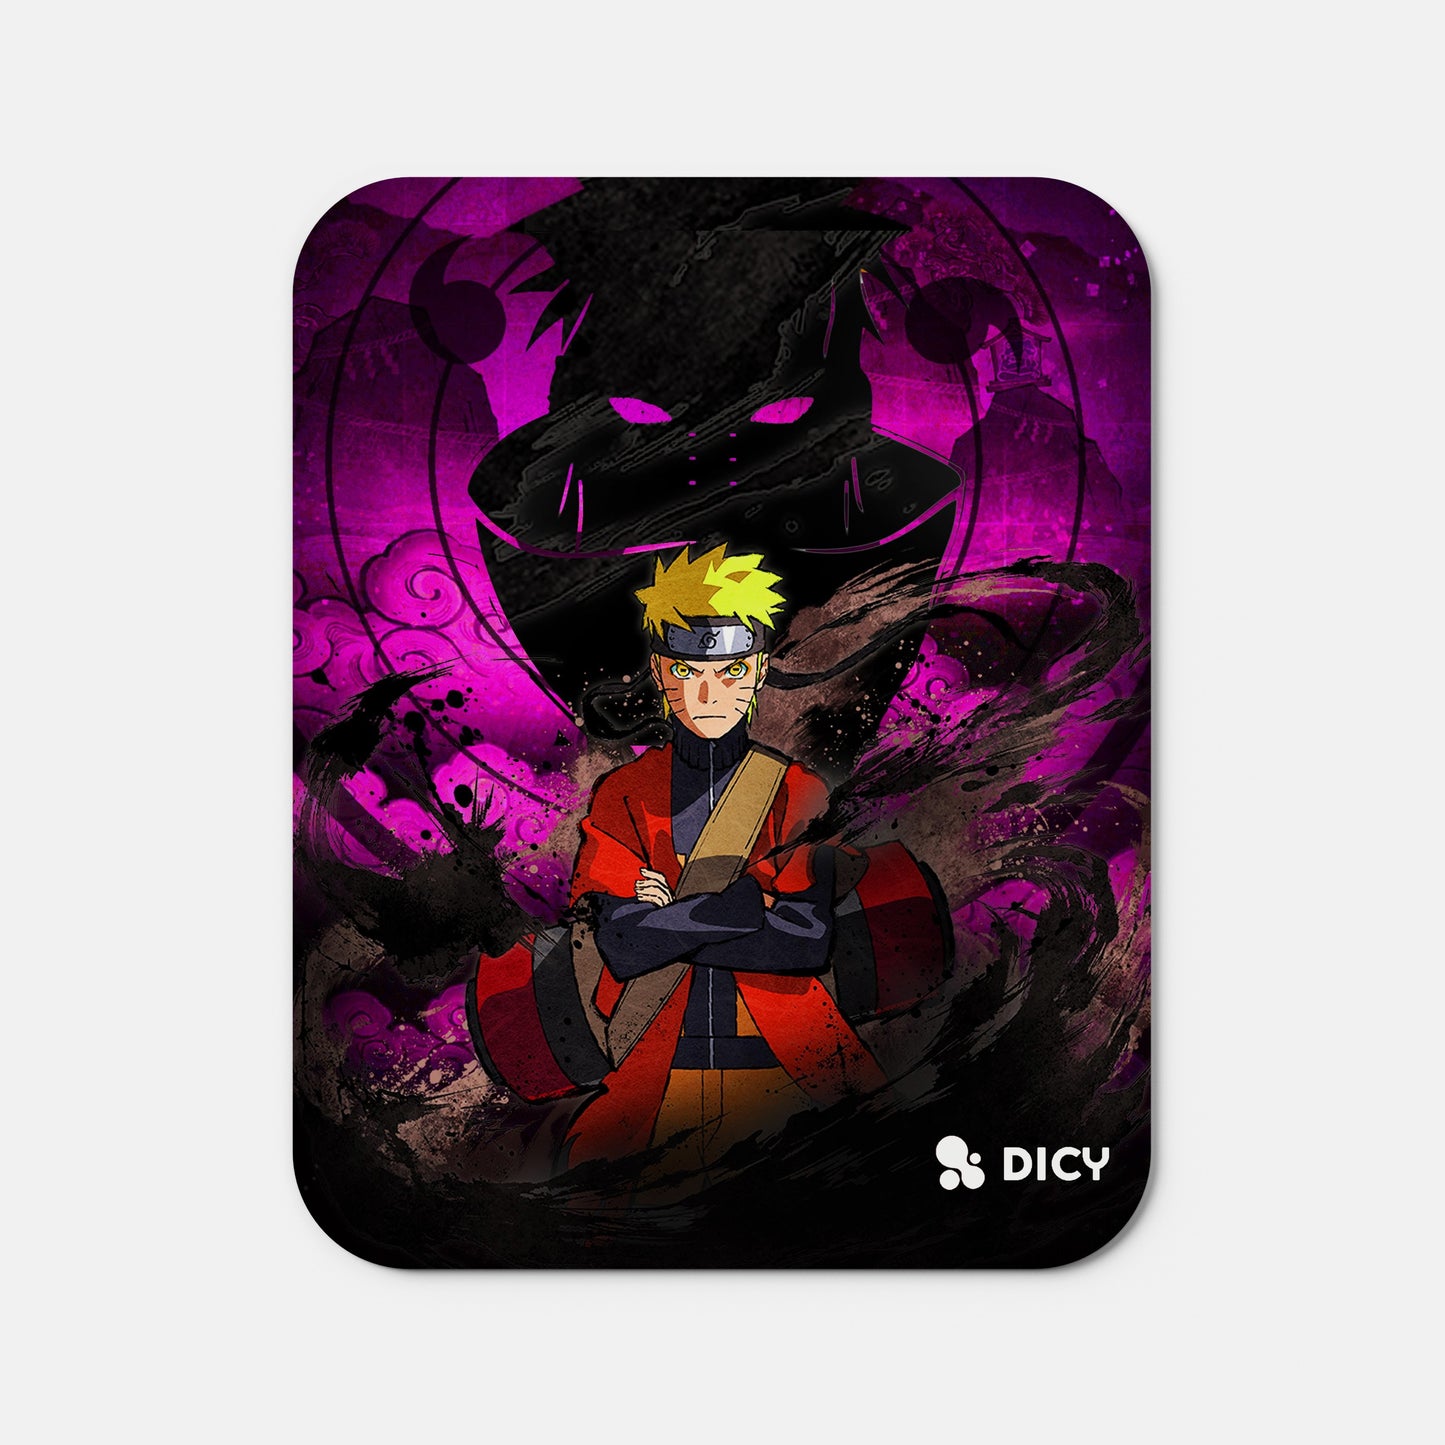 Mouse pad for Office Laptop/PC | Naruto